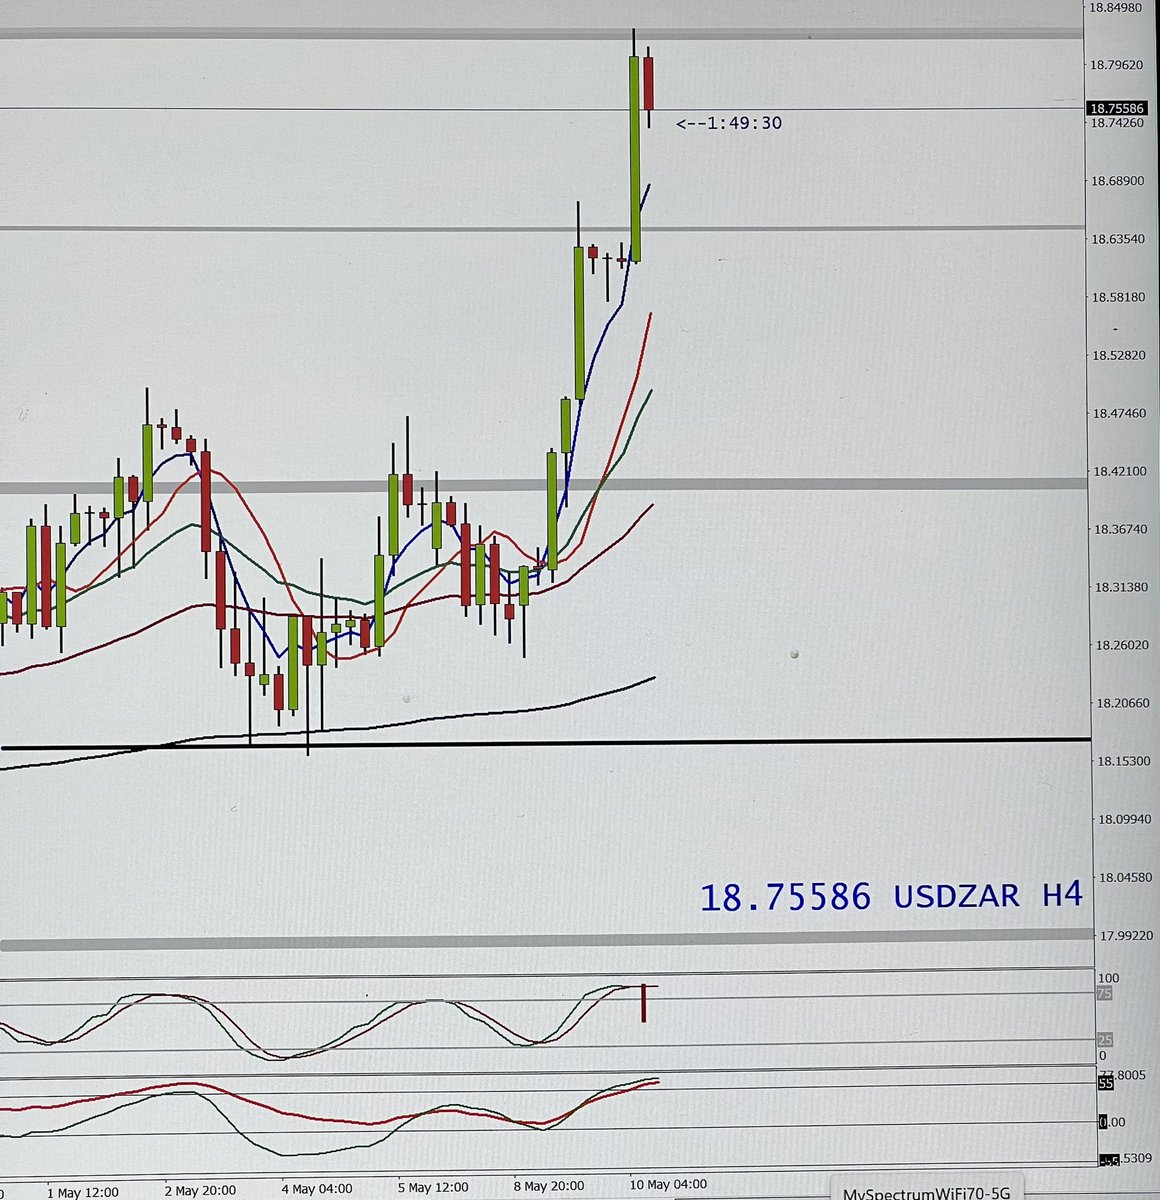 @SJosephBurns #USDZAR #PIVOTS #movingaverages  must match up to the stochastic oscillator. Easy in and out. #LunchMoney